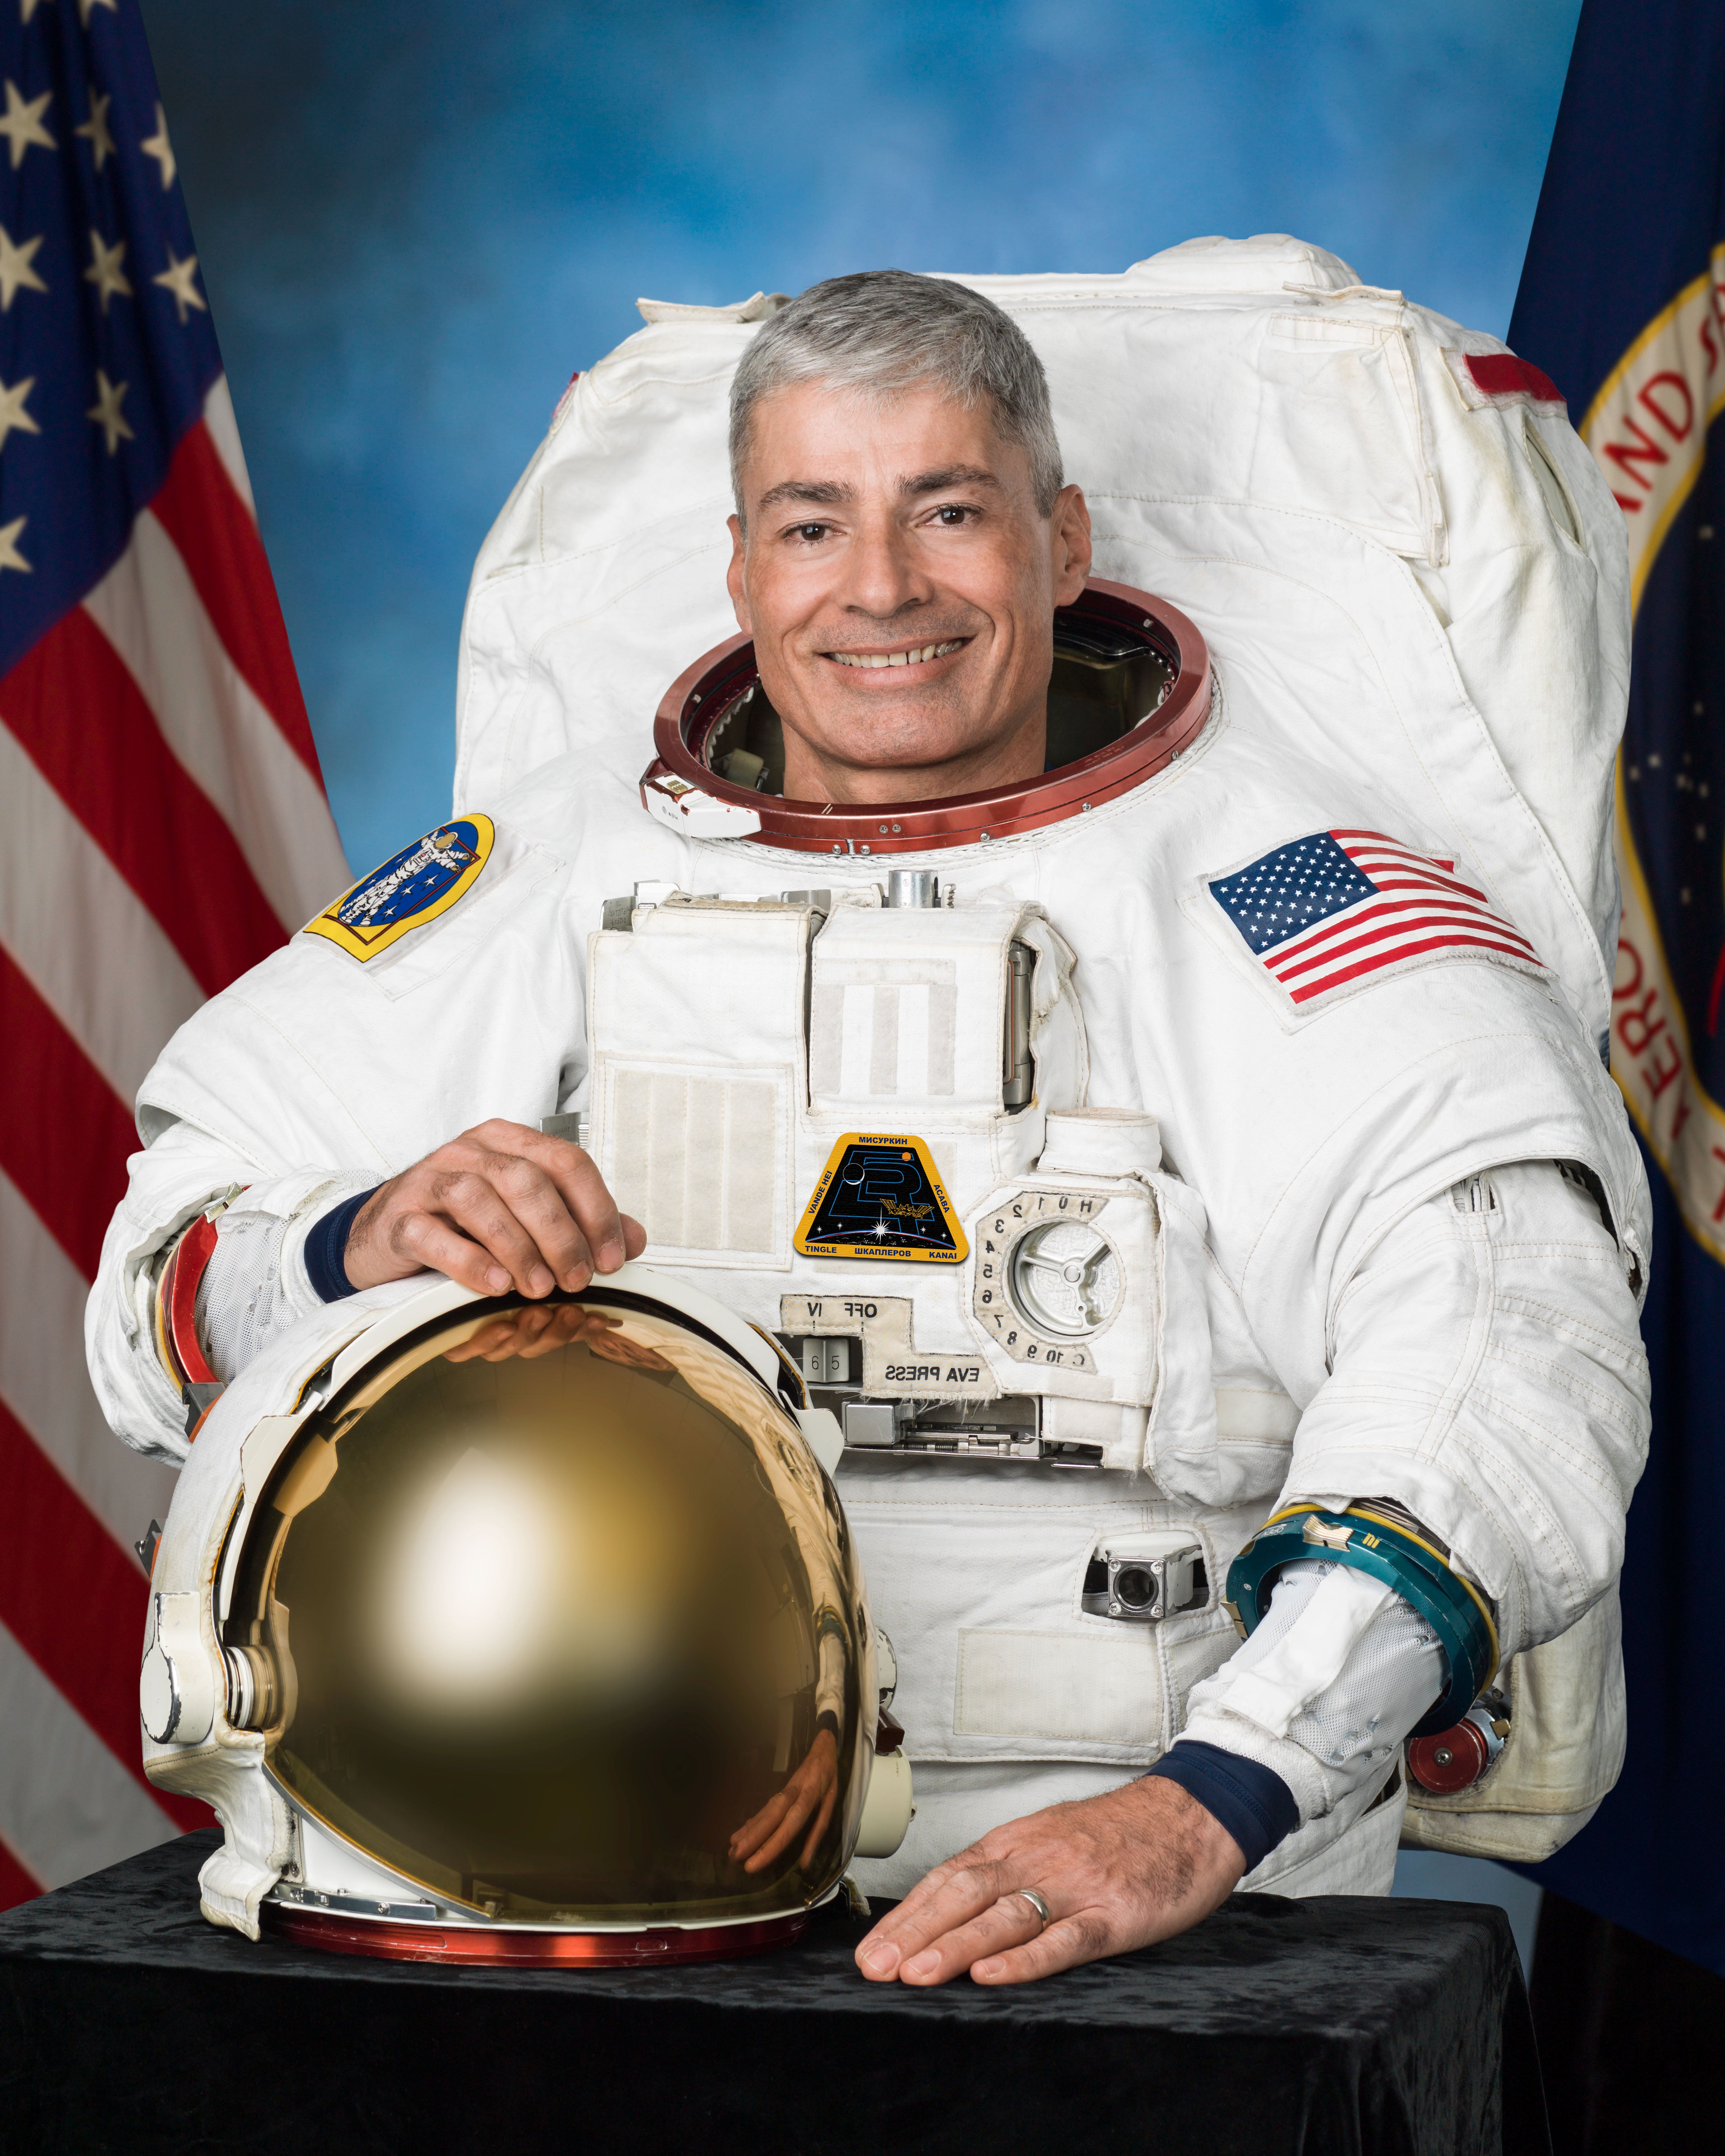 Nasa astronaut Mark Vande Hei will soon set a space agency record for conseuctutive days in space